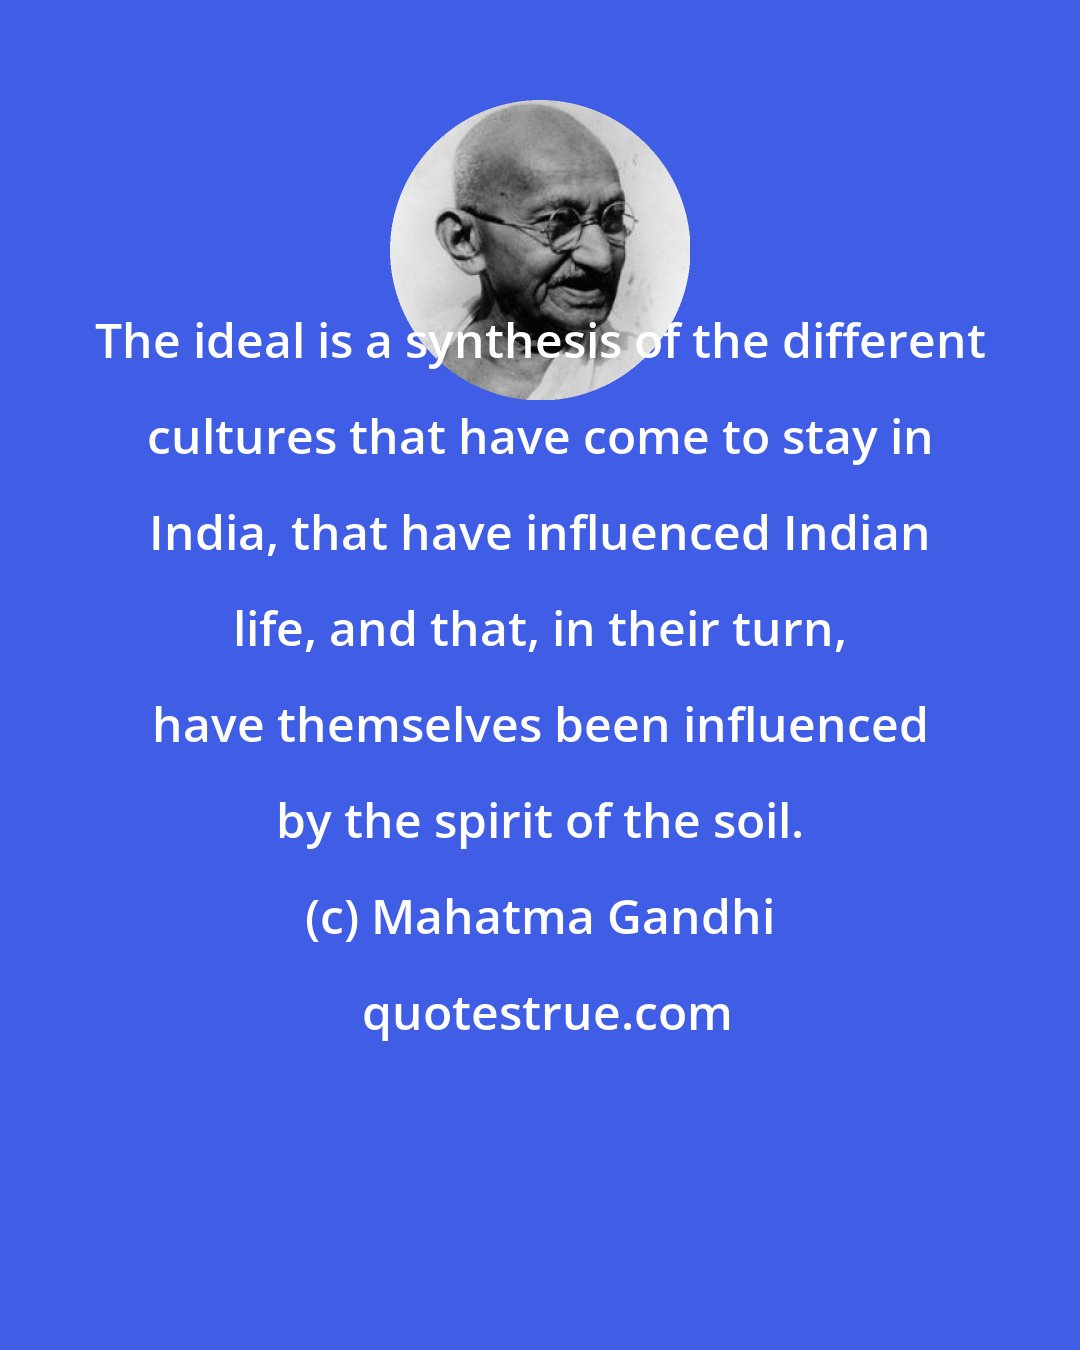 Mahatma Gandhi: The ideal is a synthesis of the different cultures that have come to stay in India, that have influenced Indian life, and that, in their turn, have themselves been influenced by the spirit of the soil.